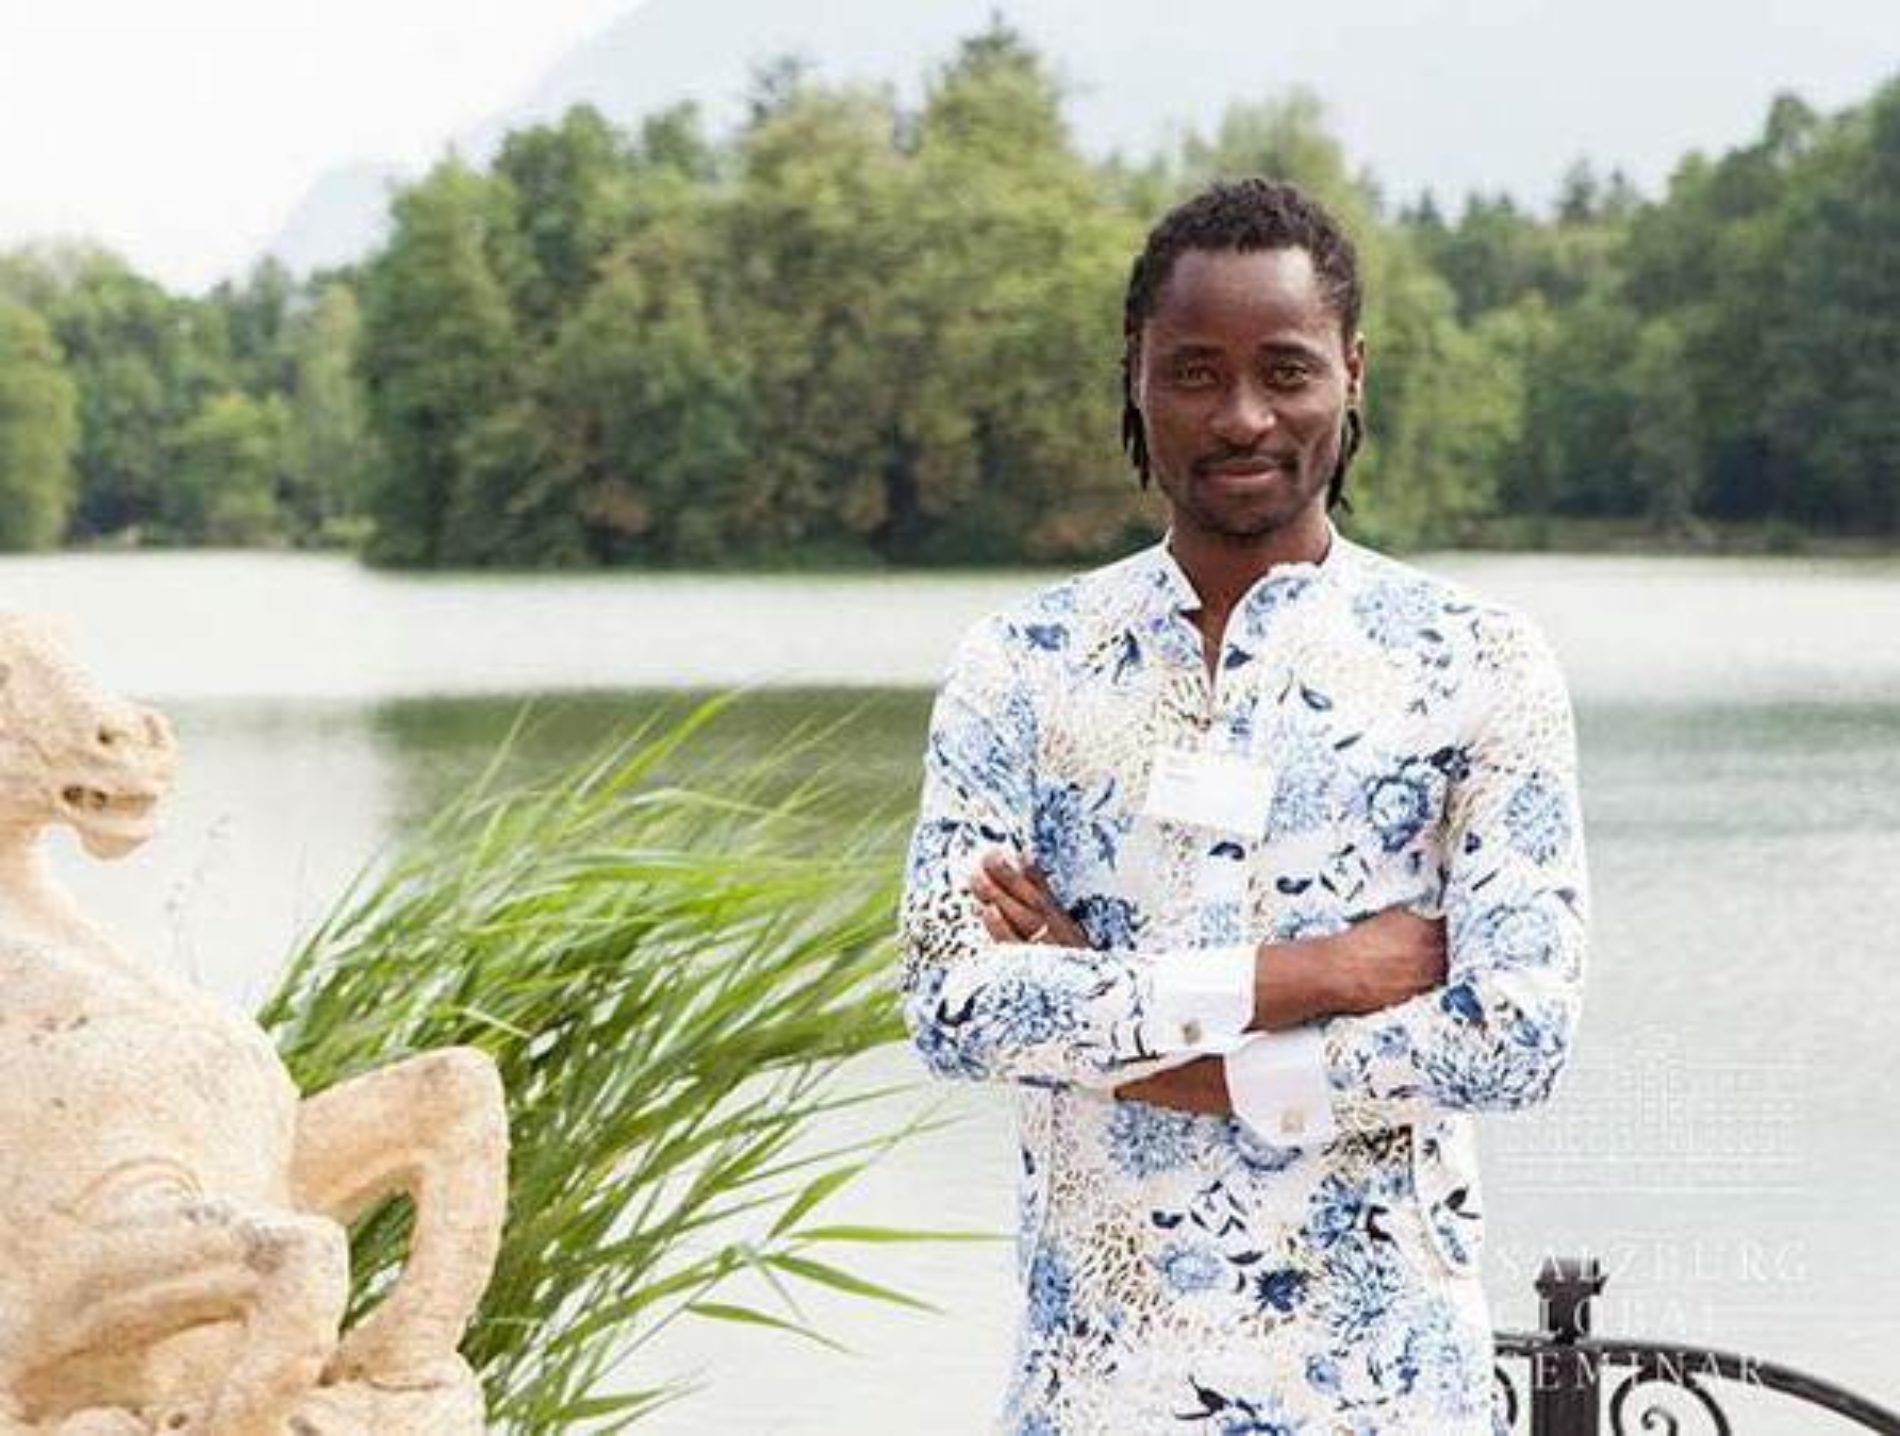 “I Was Sexually Abused Twice.” Bisi Alimi talks about his experience with sexual misconduct